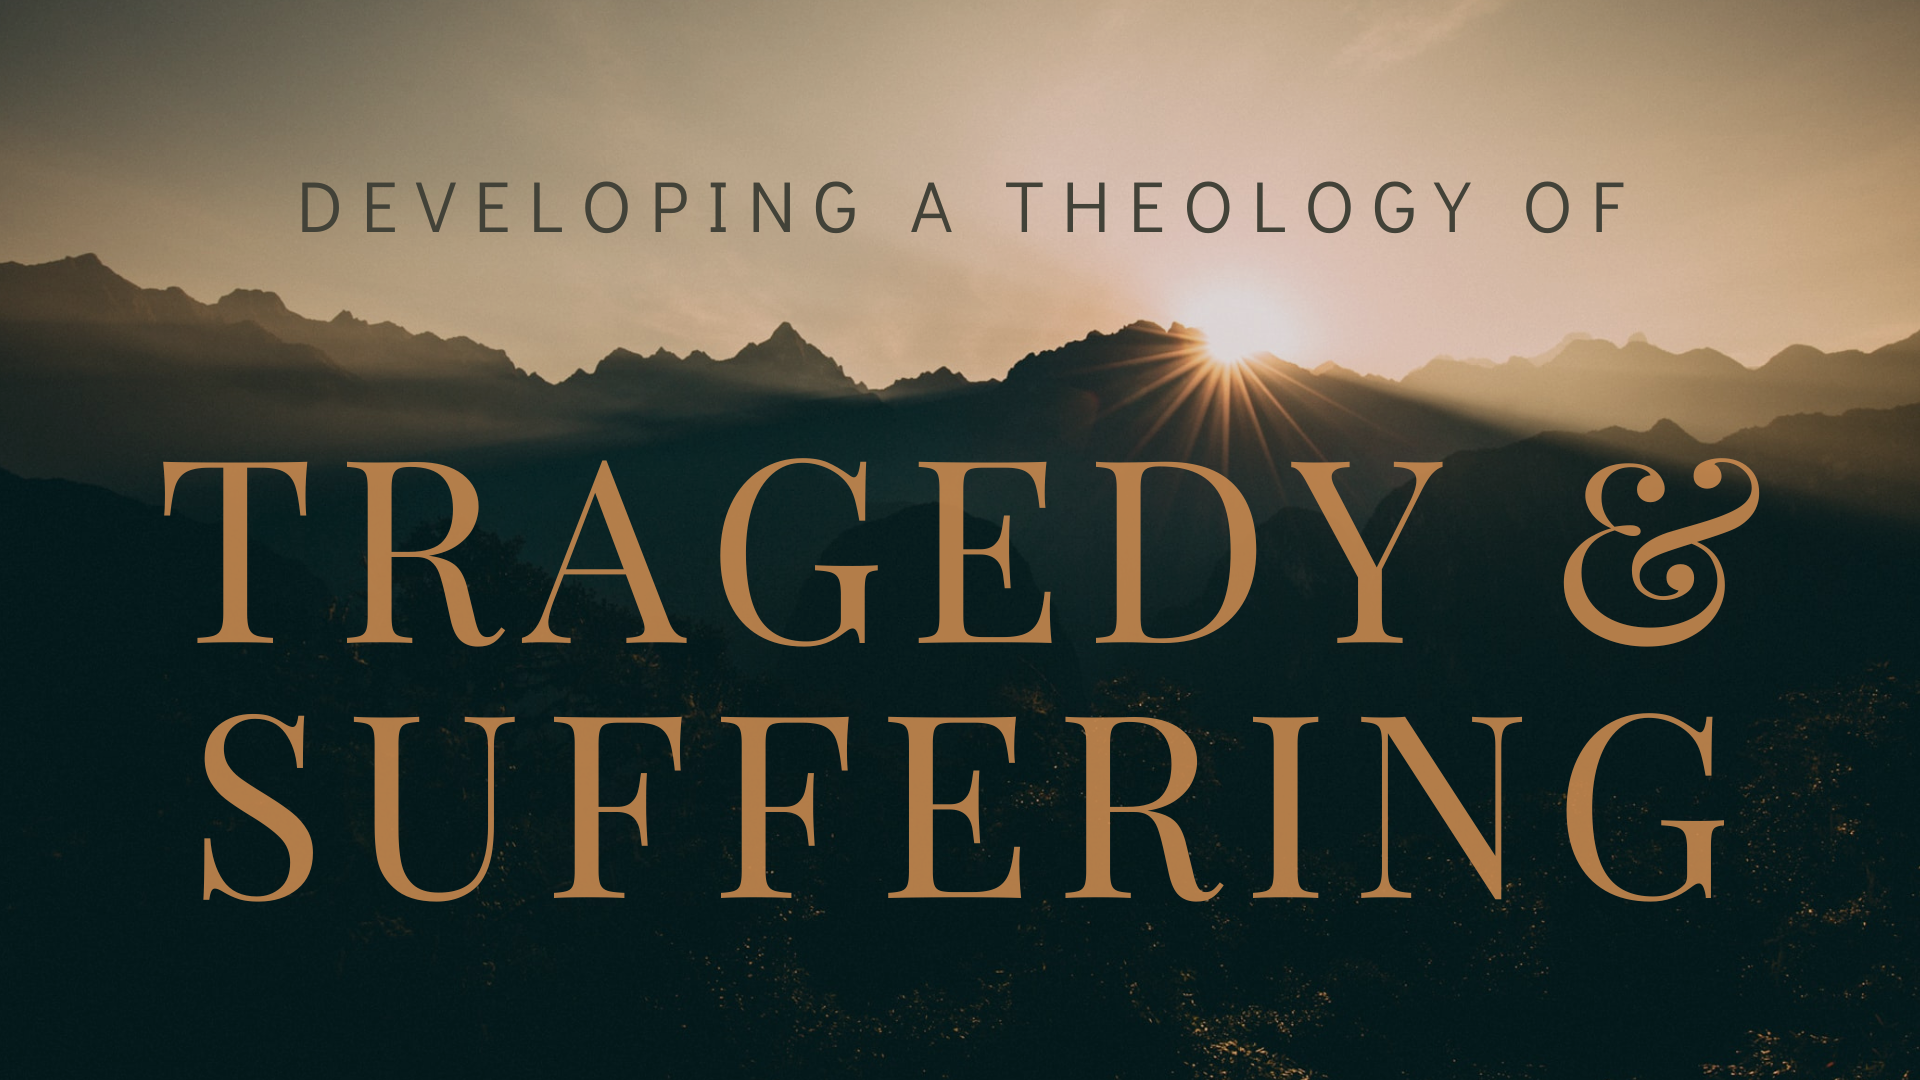 A Theology of Tragedy and Suffering Part 1